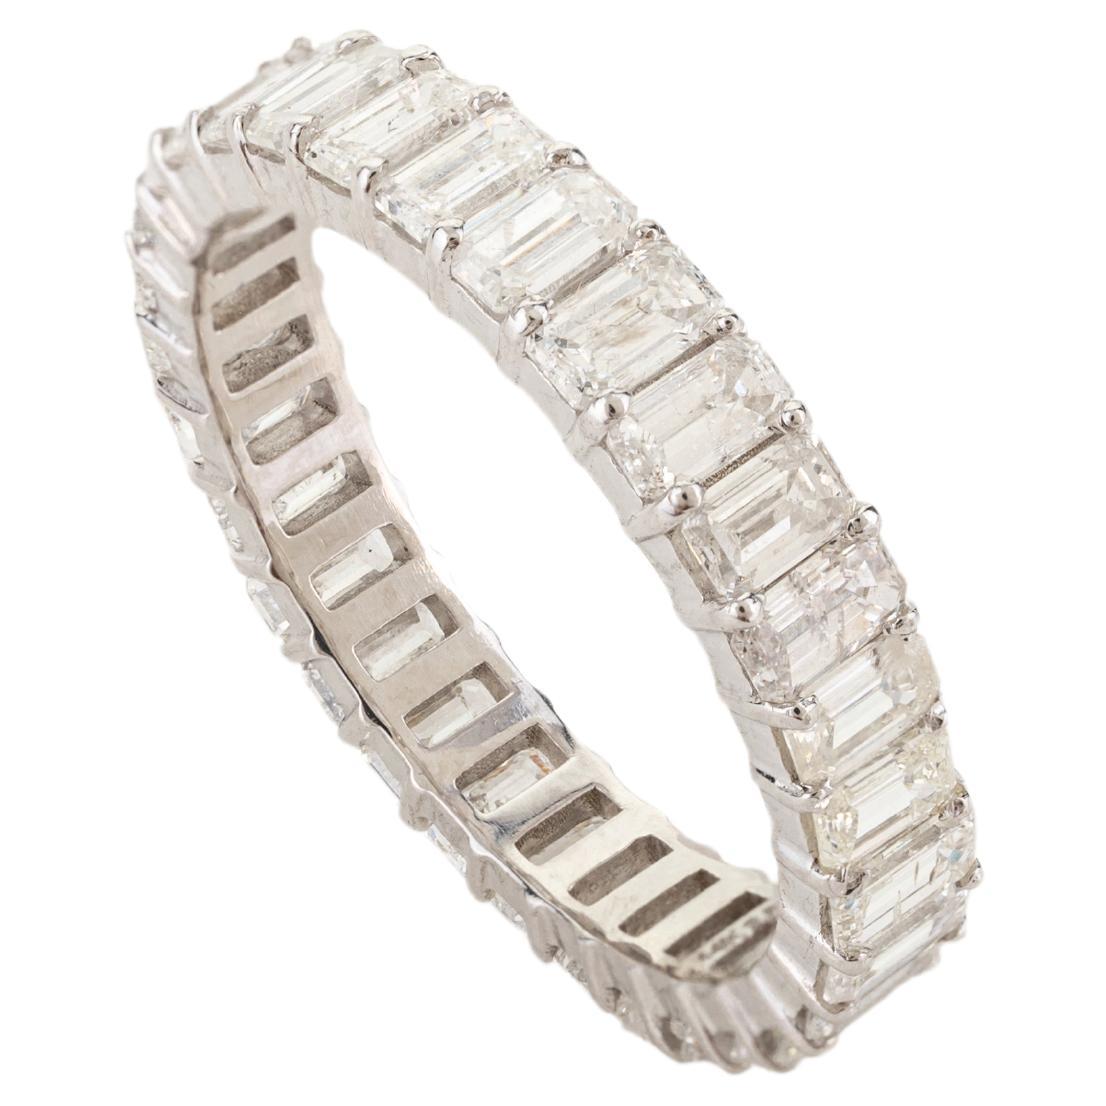 2.86 Carat Emerald Cut Diamond Eternity Band Ring in 14k Solid White Gold